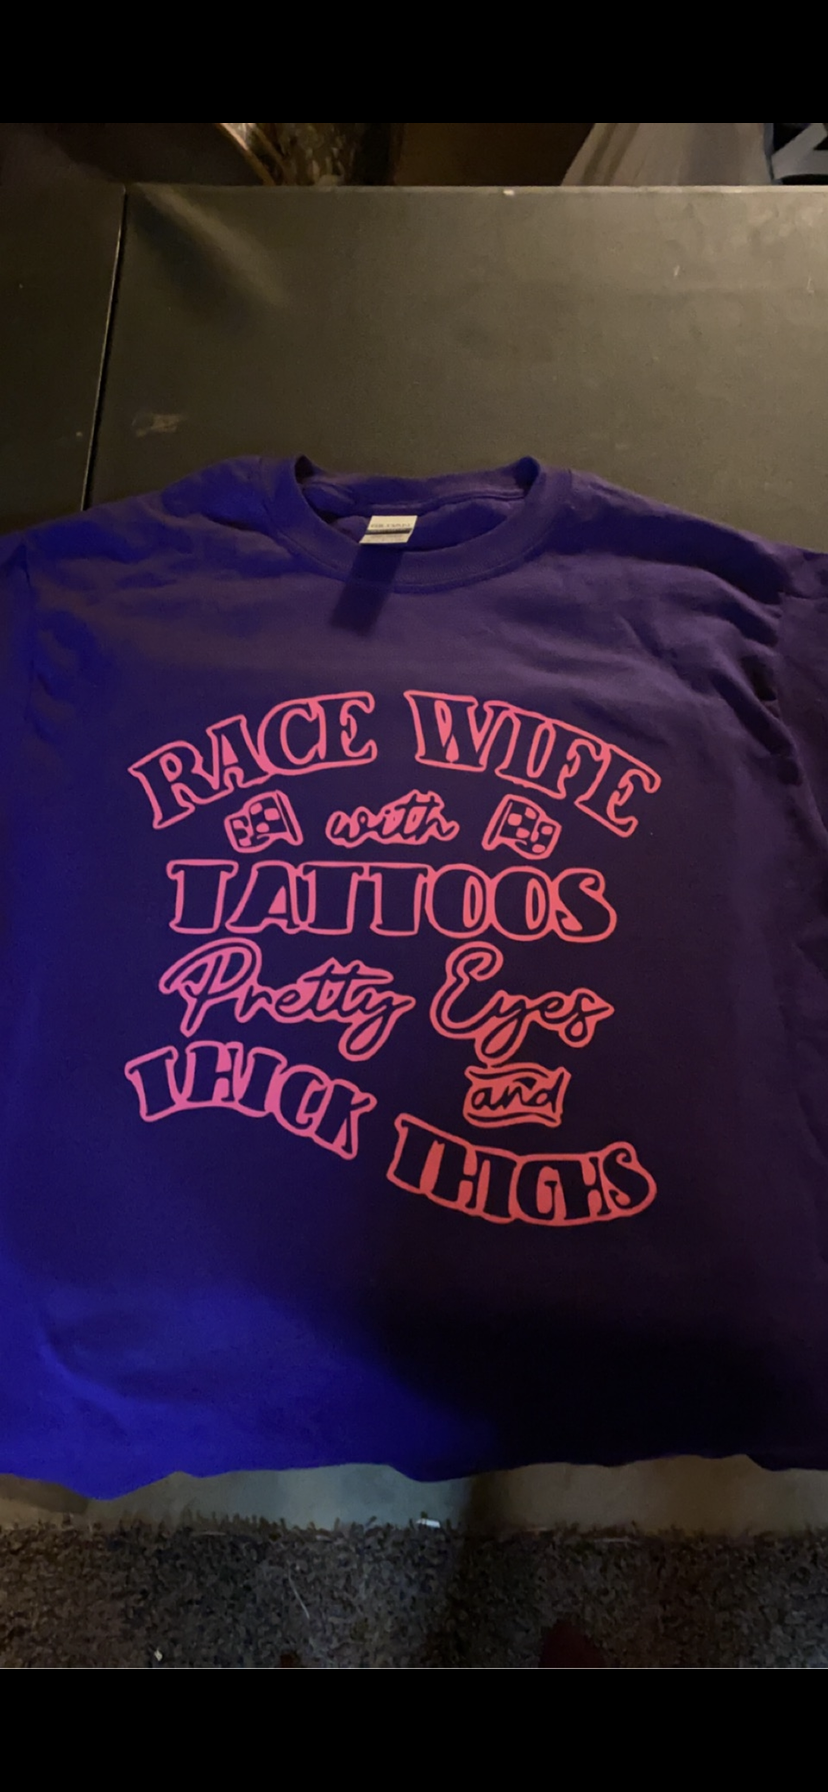 Race wife with tattoos pretty eyes and thick thighs